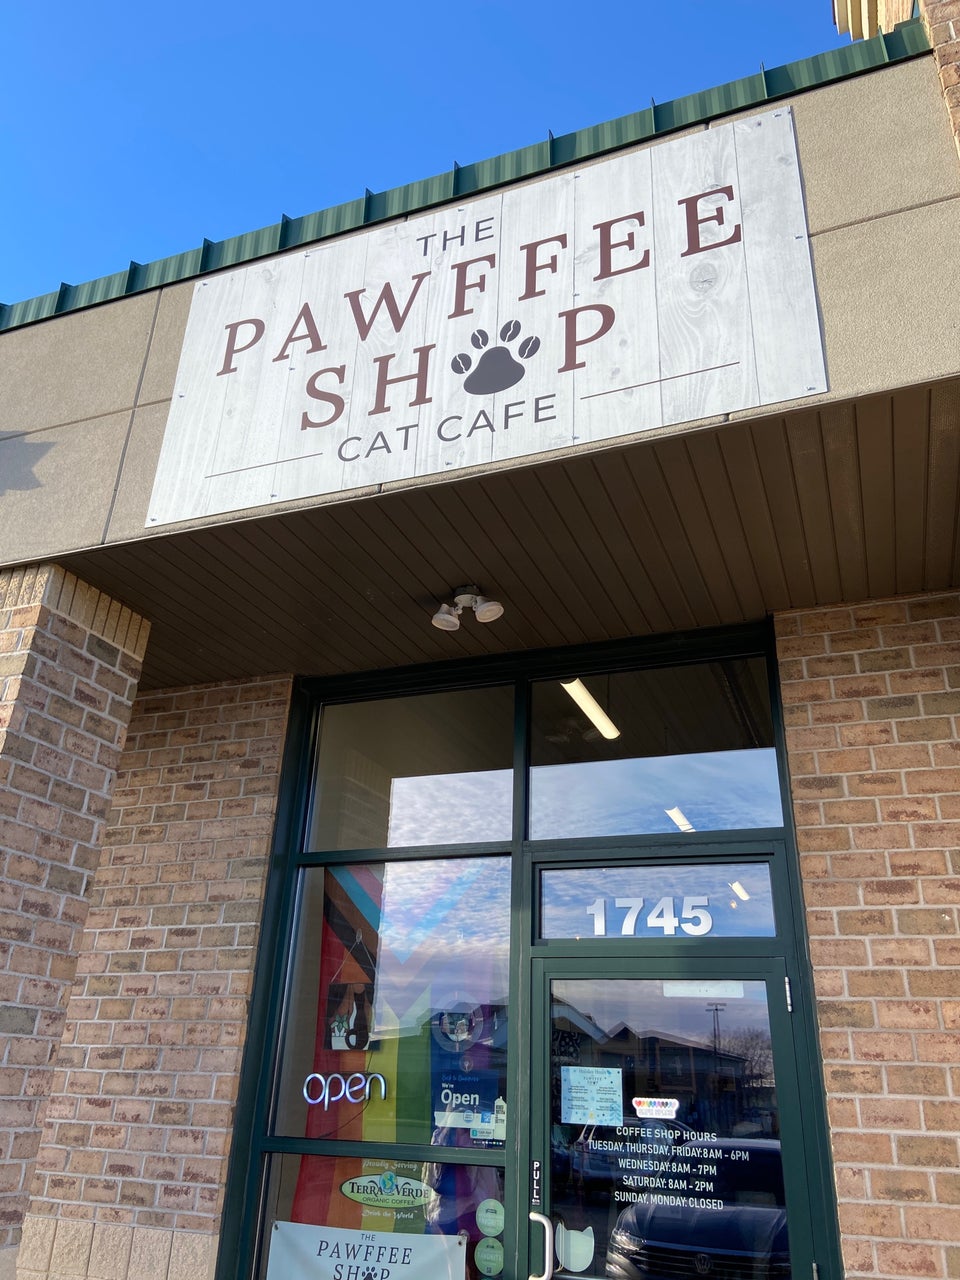 The Pawffee Shop Cat Cafe